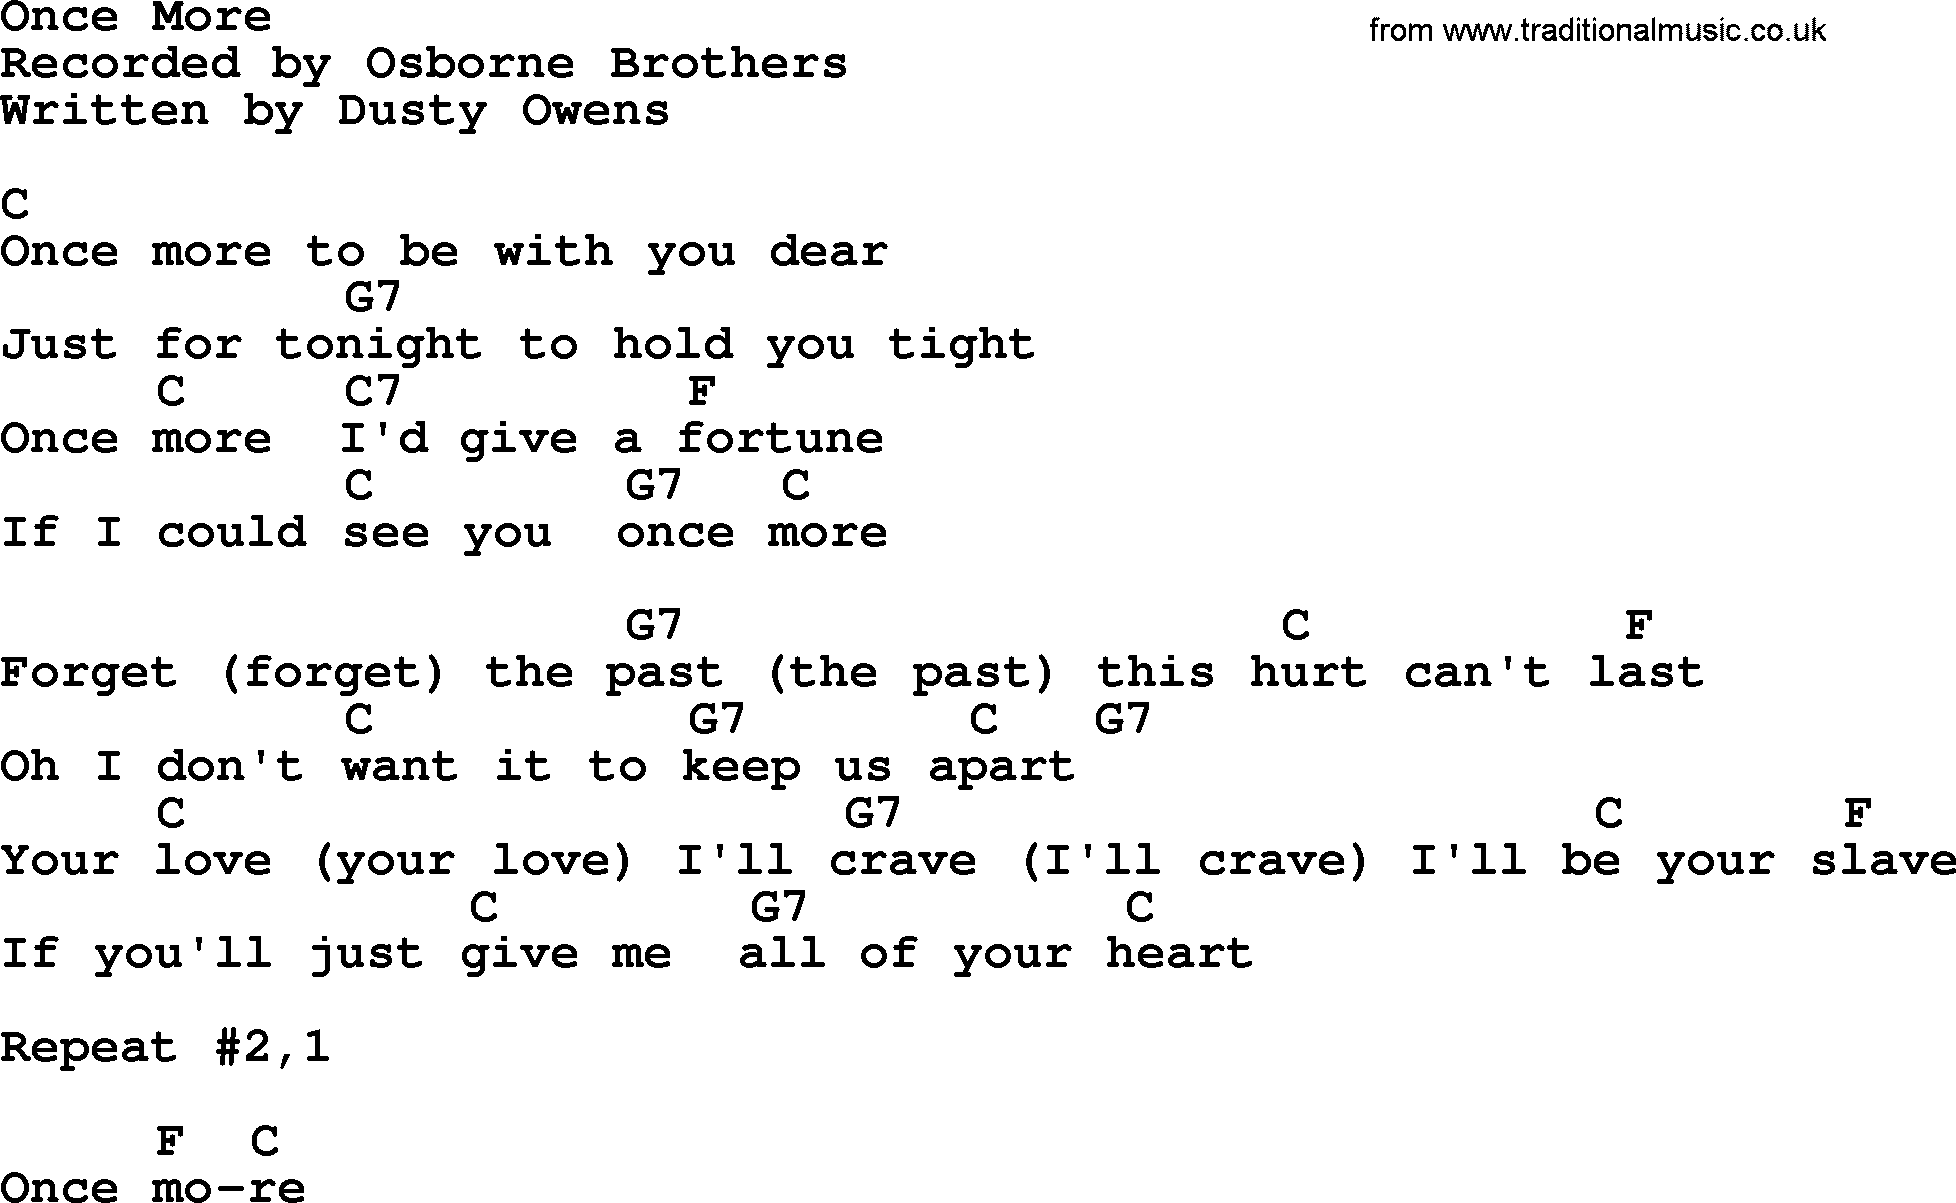 Bluegrass song: Once More, lyrics and chords